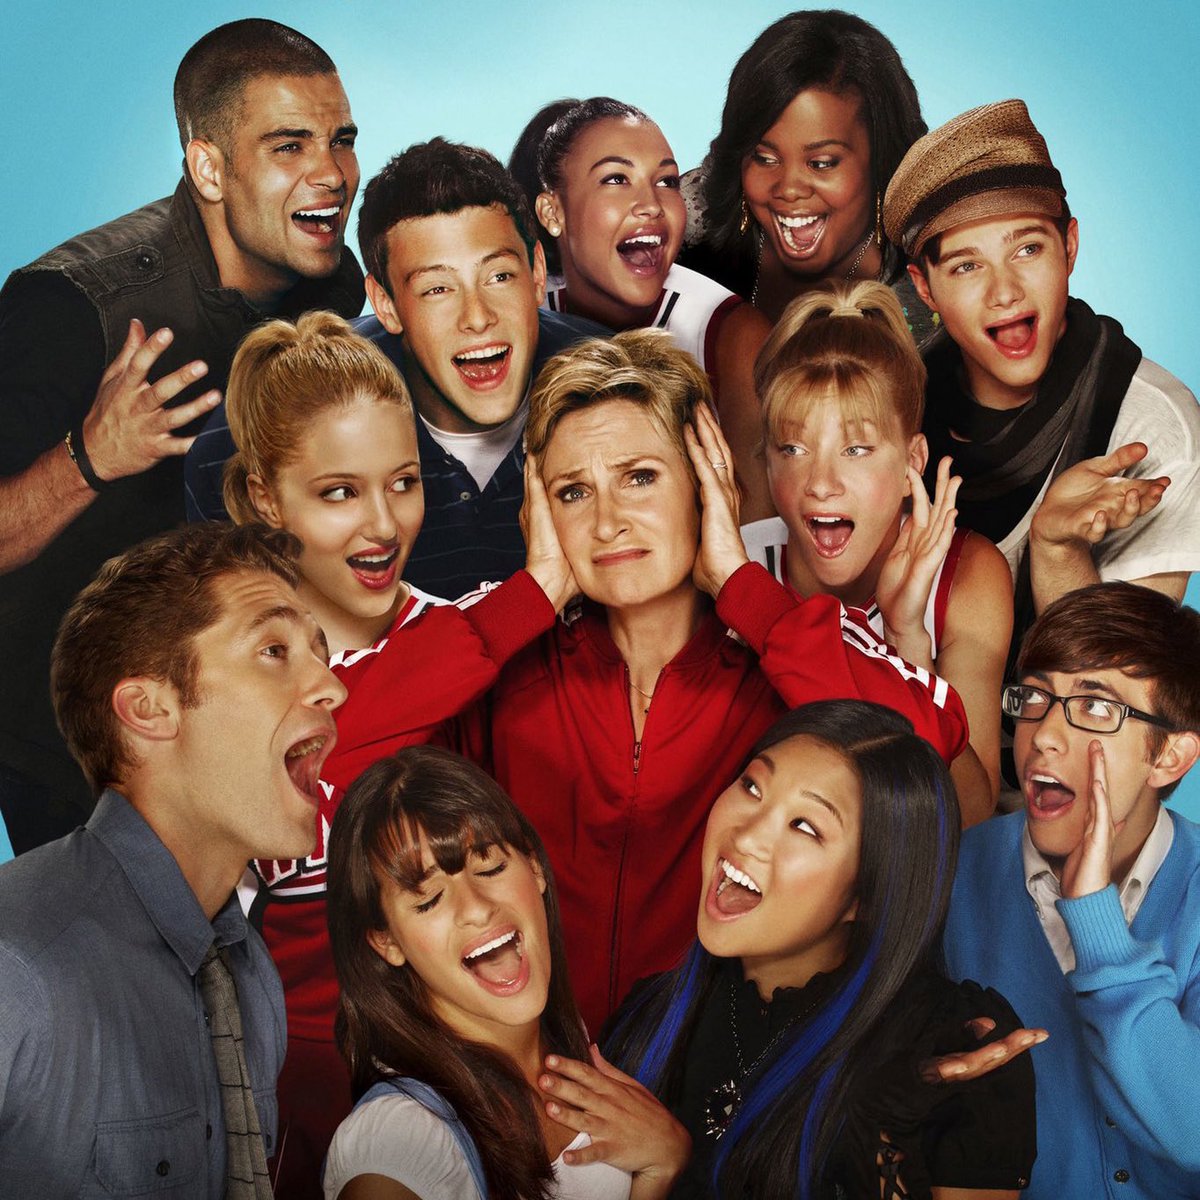 ‘GLEE’ premiered 15 years ago today.